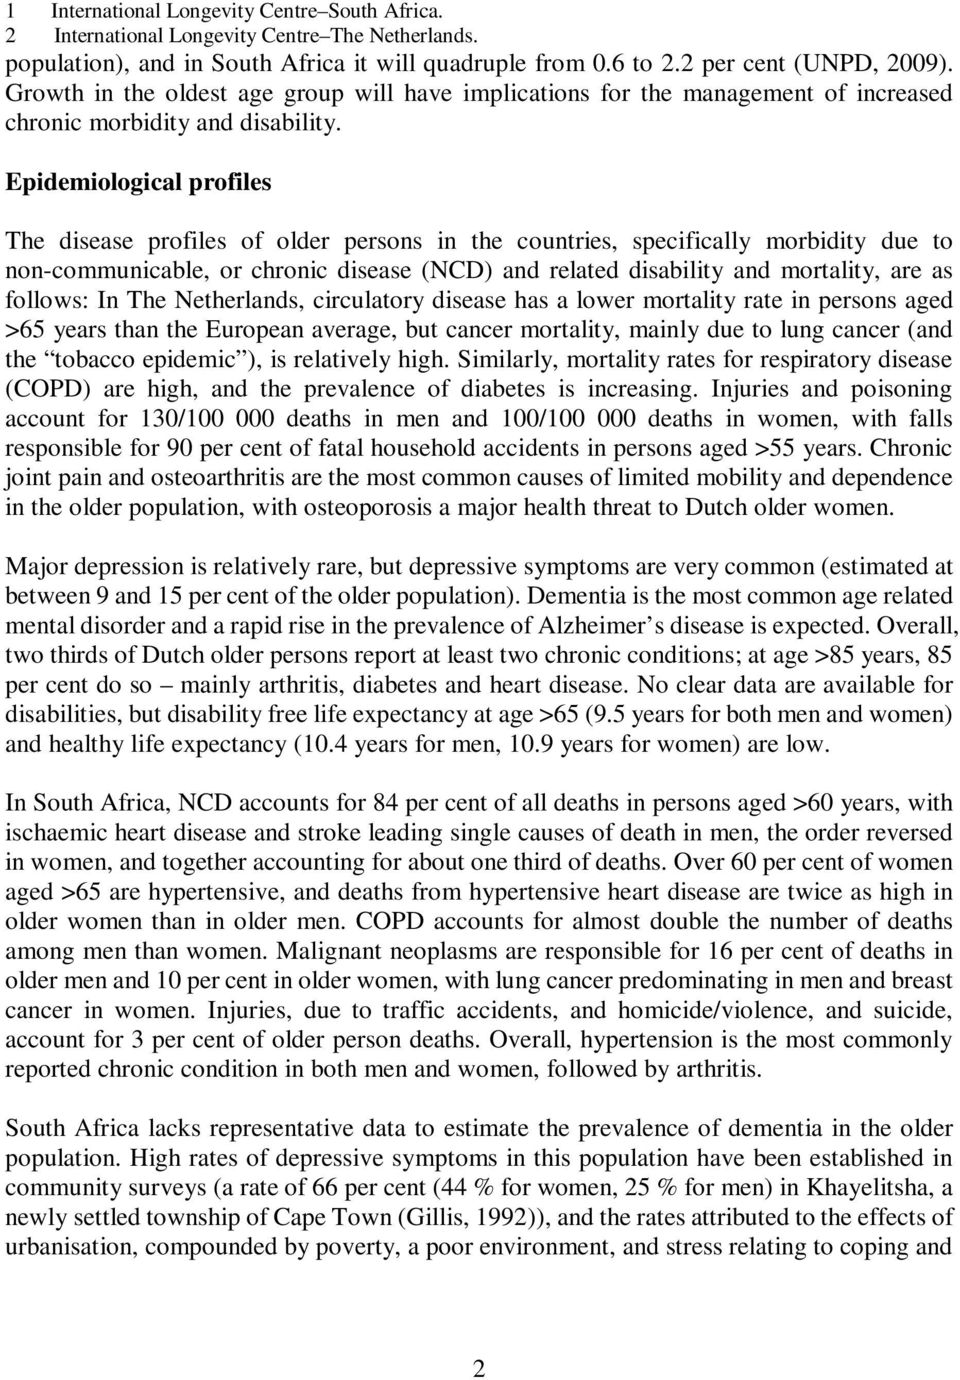 Epidemiological profiles The disease profiles of older persons in the countries, specifically morbidity due to non-communicable, or chronic disease (NCD) and related disability and mortality, are as